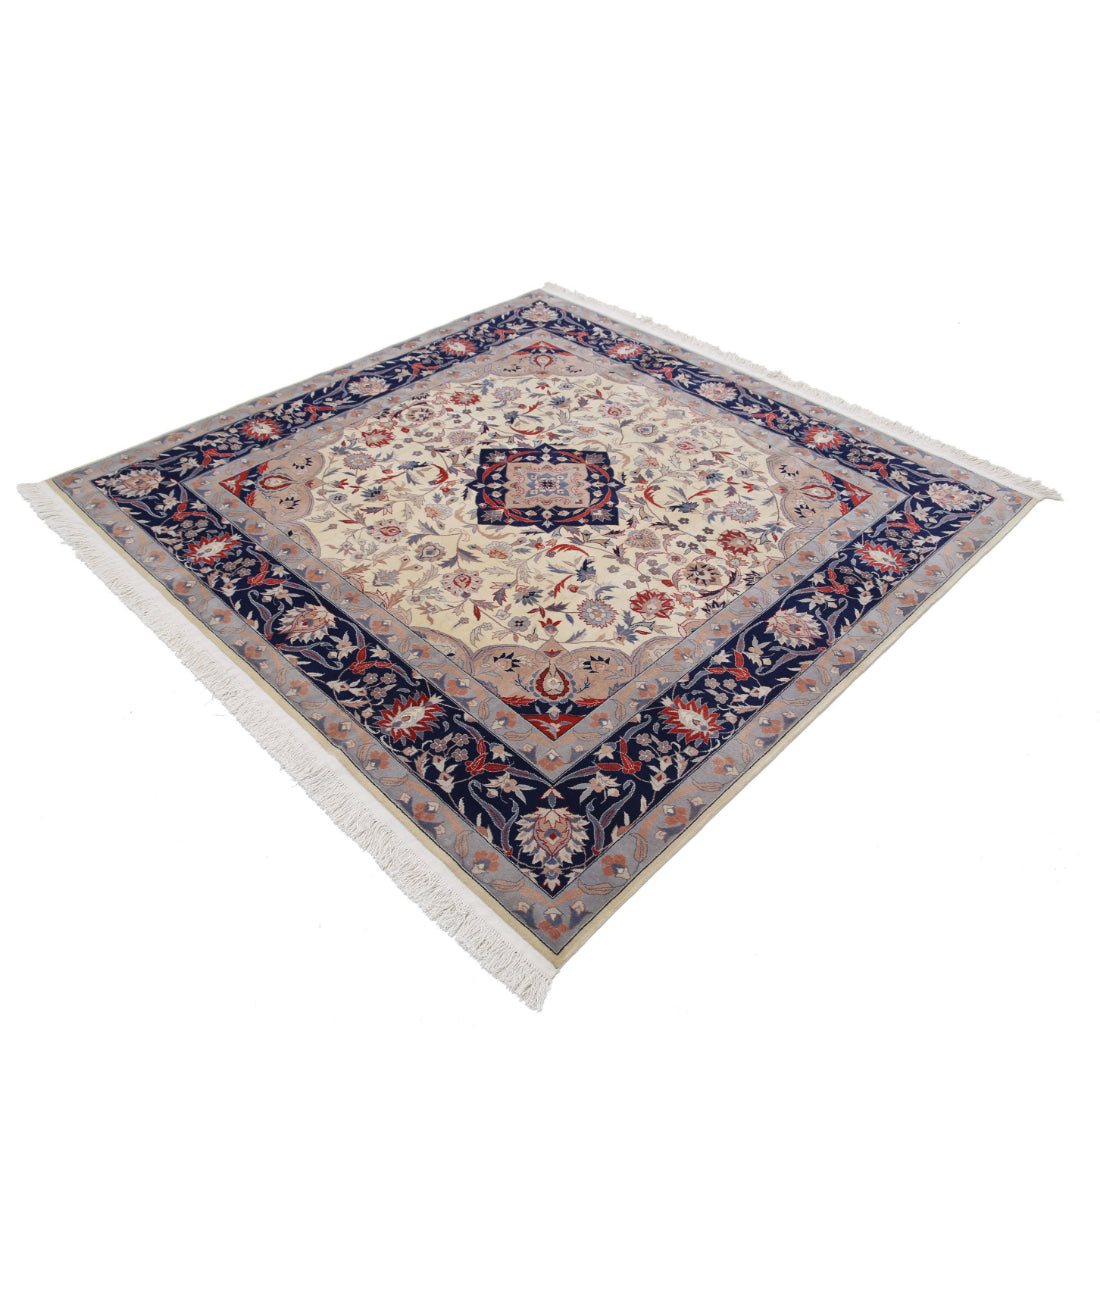 Heritage 6'1'' X 6'1'' Hand-Knotted Wool Rug 6'1'' x 6'1'' (183 X 183) / Ivory / Blue